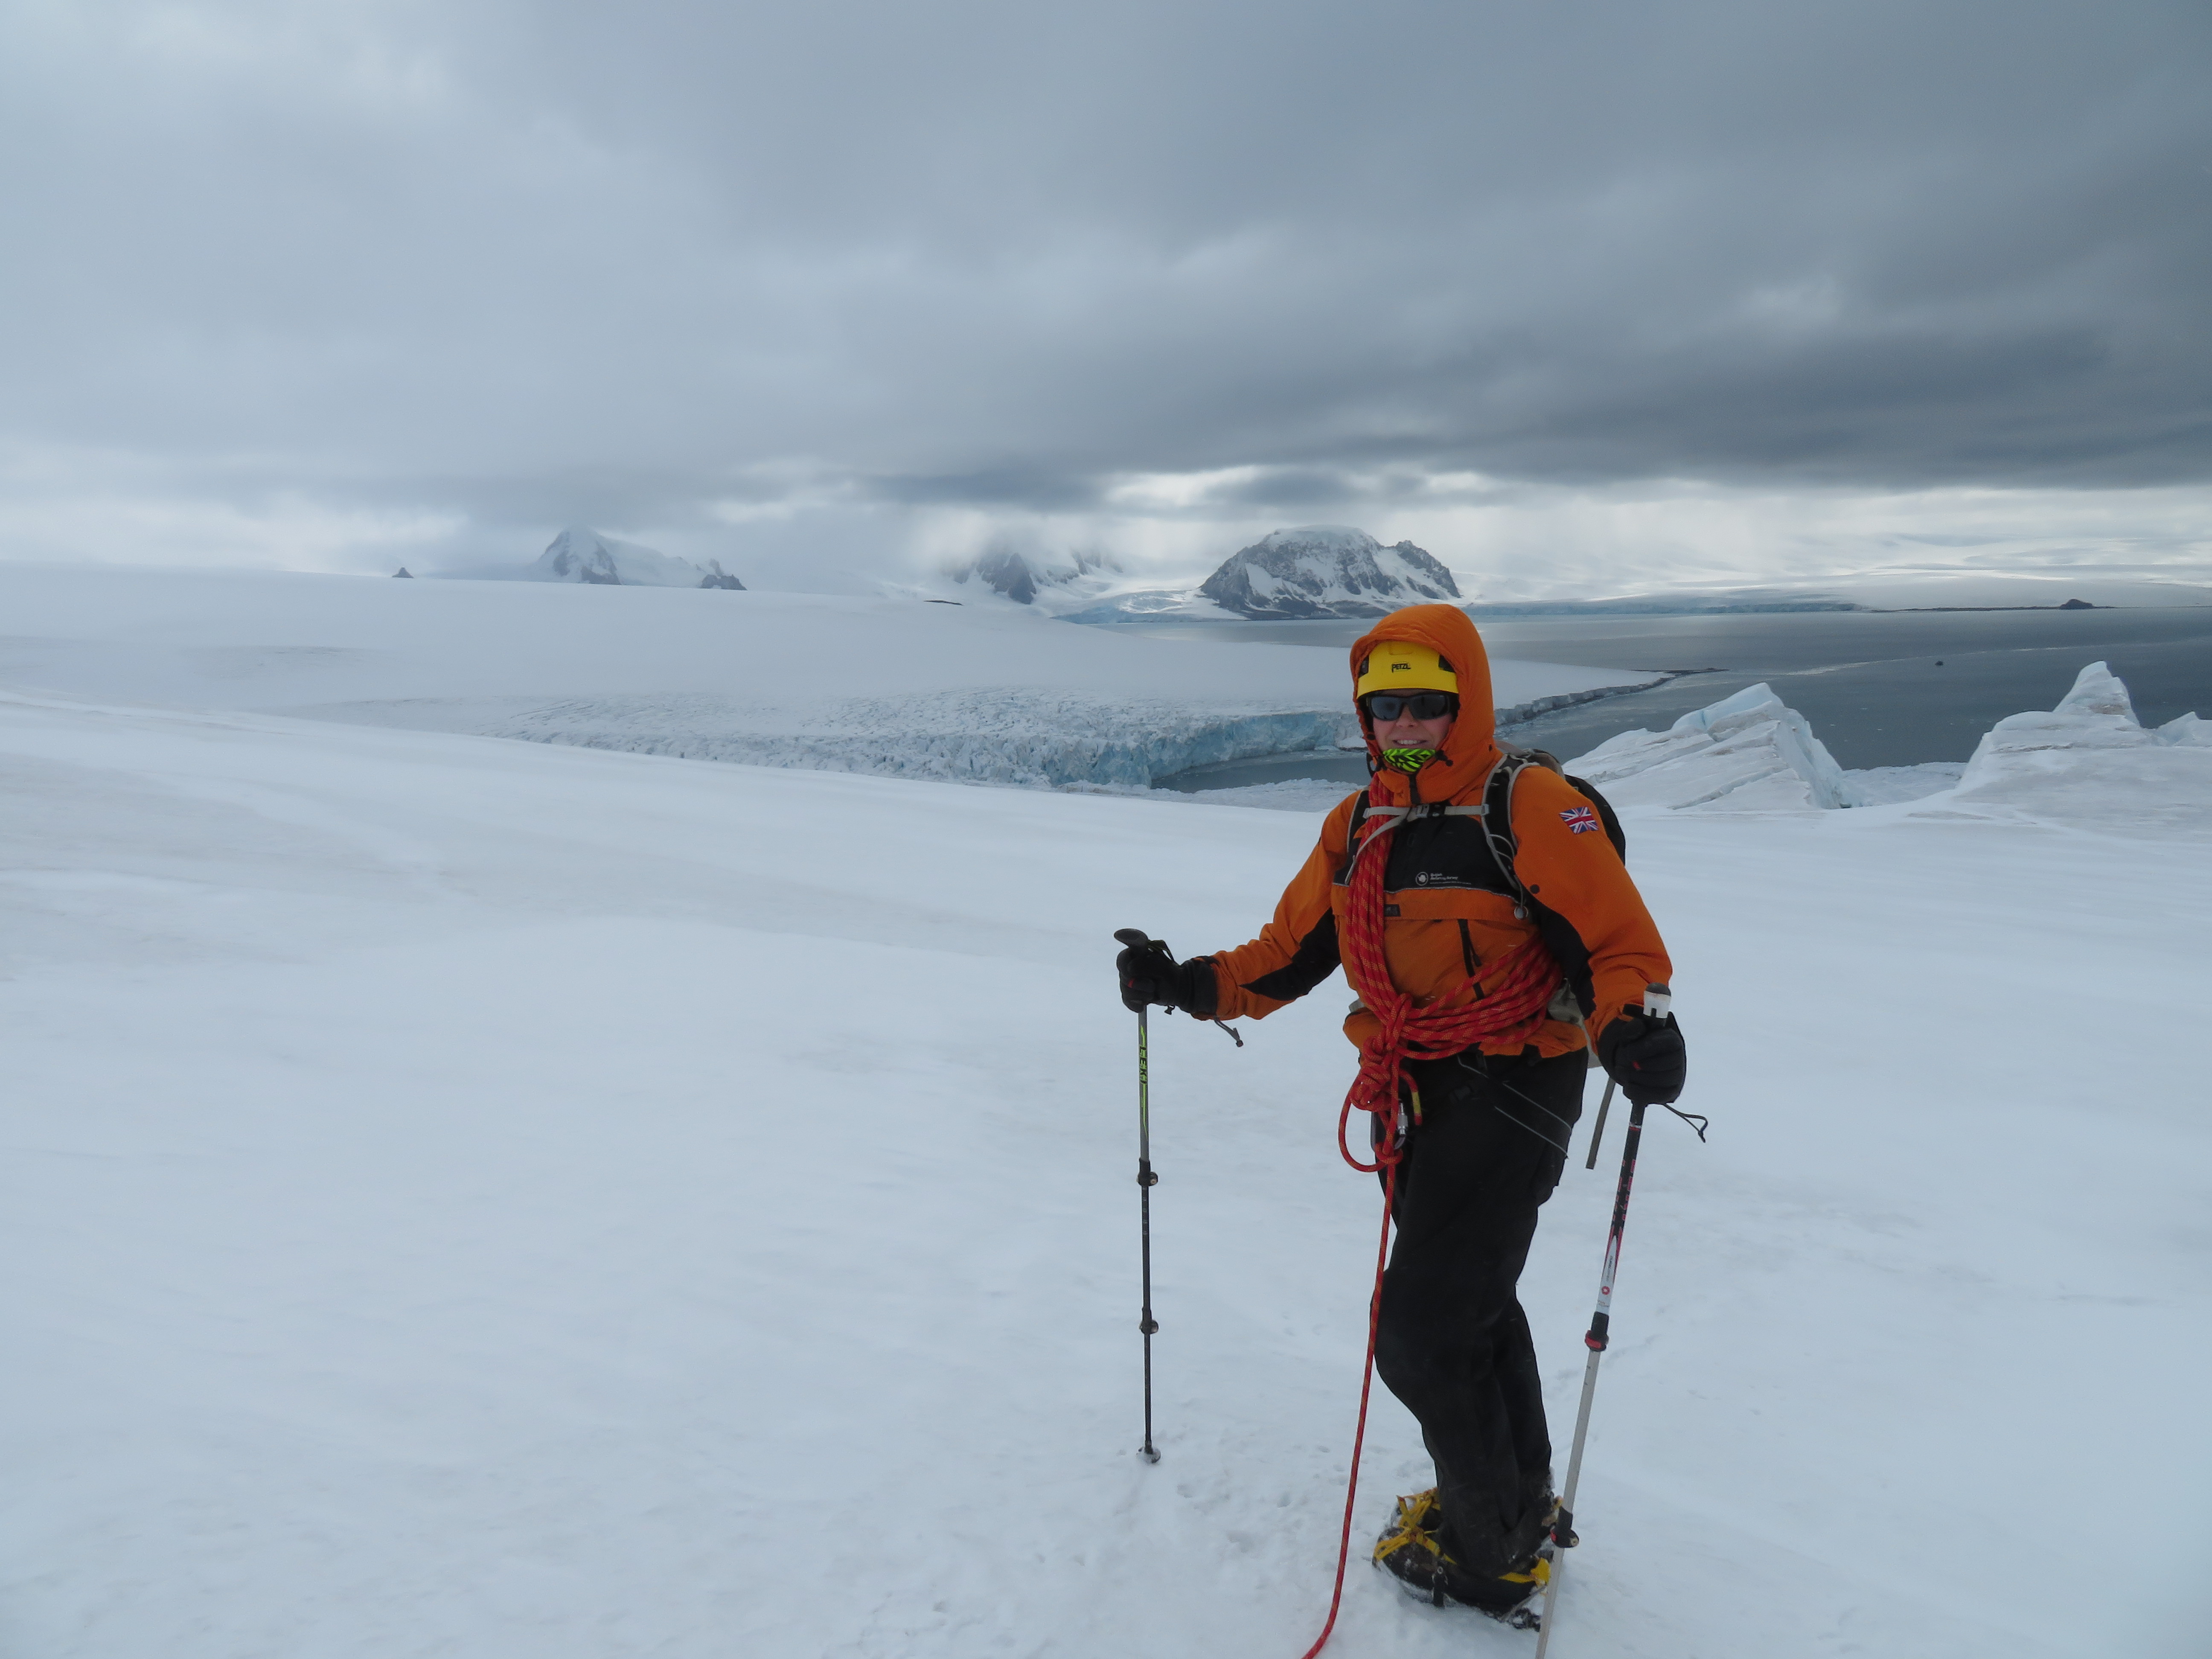 Rowan Whittle on an expedition in Antarctica